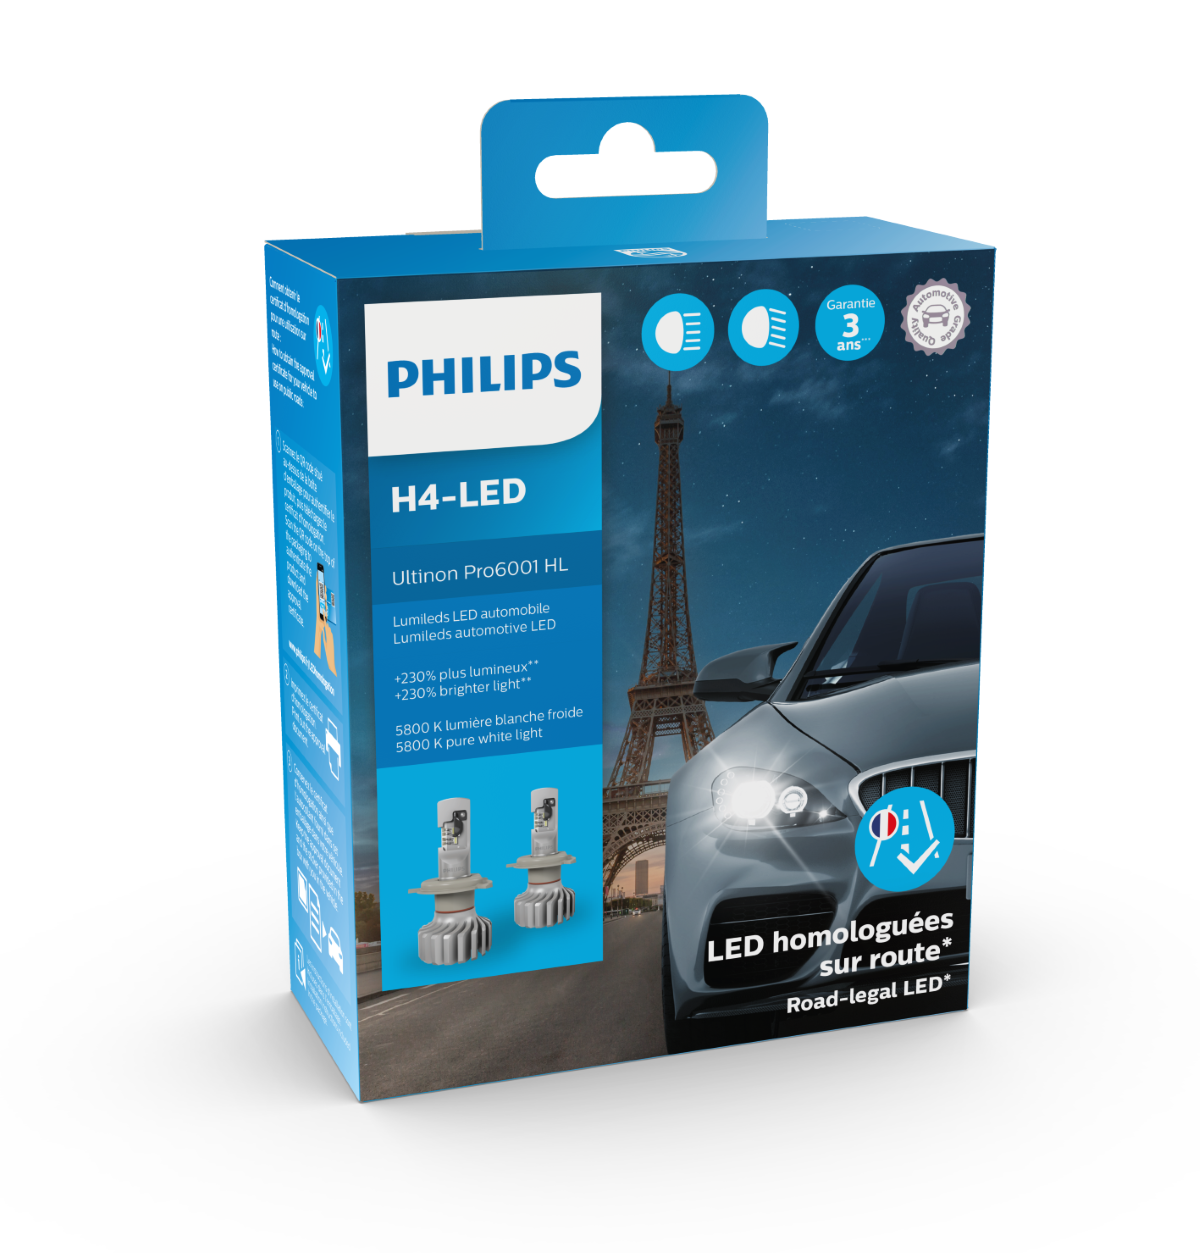 philips led h4 ultinon pro6001 packaging